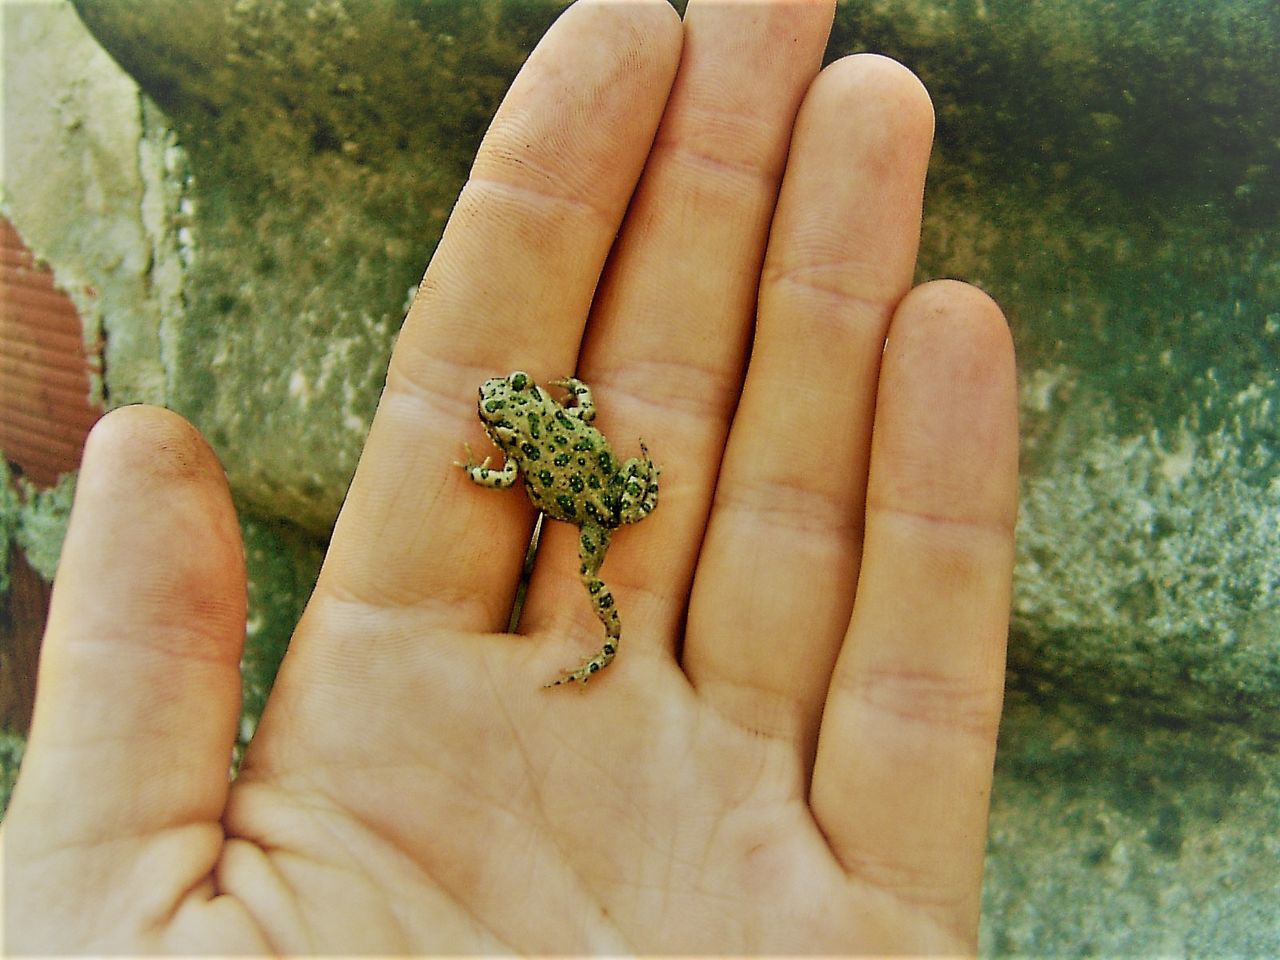 CLOSE-UP OF HAND HOLDING GREEN LEAF